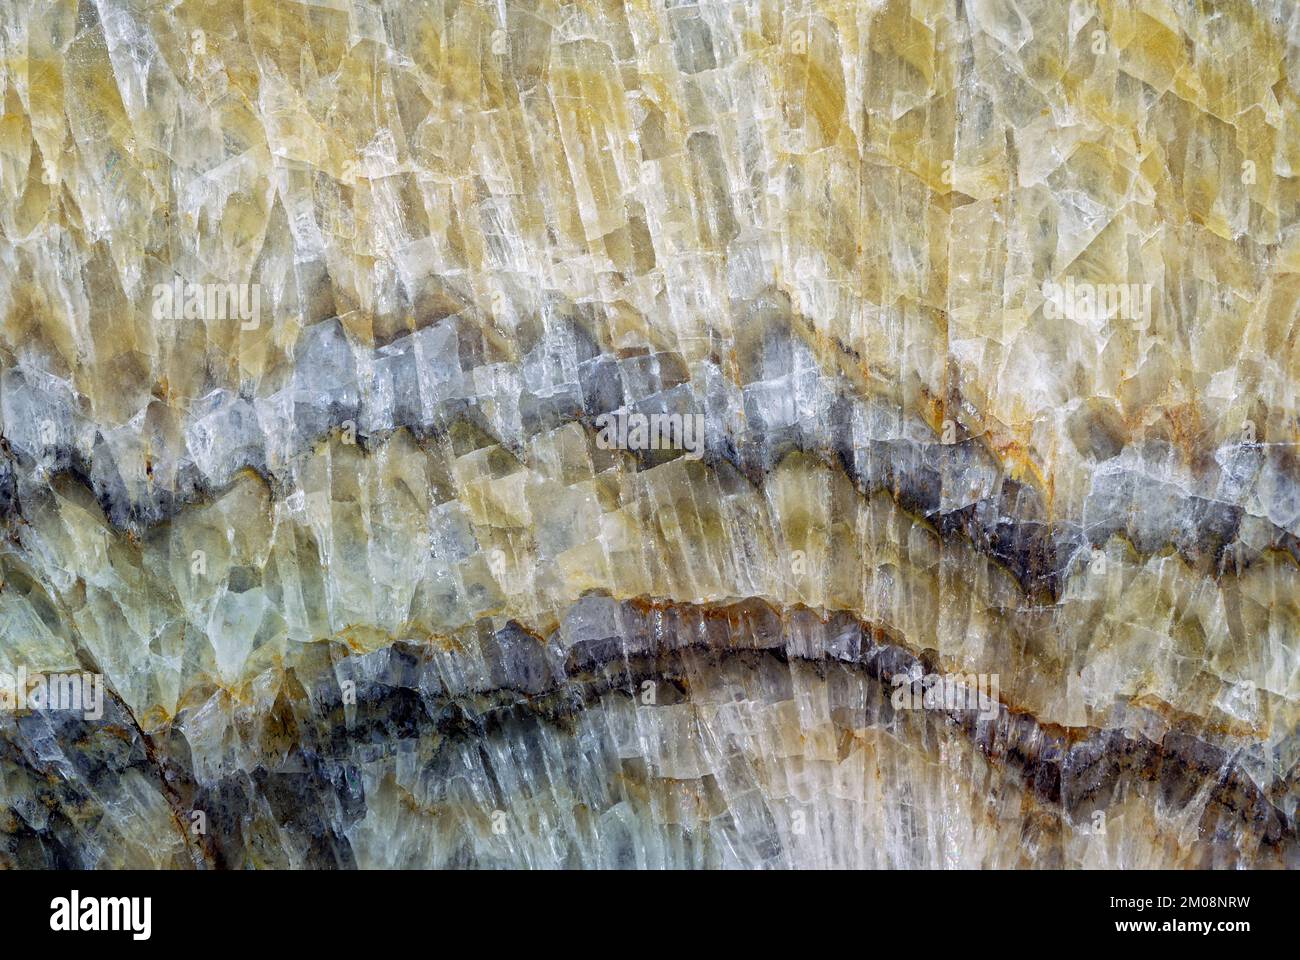 Backgrounds and textures: surface of beautiful decorative stone, abstract blue, yellow and green pattern of cracks, spots and stains, natural backgrou Stock Photo